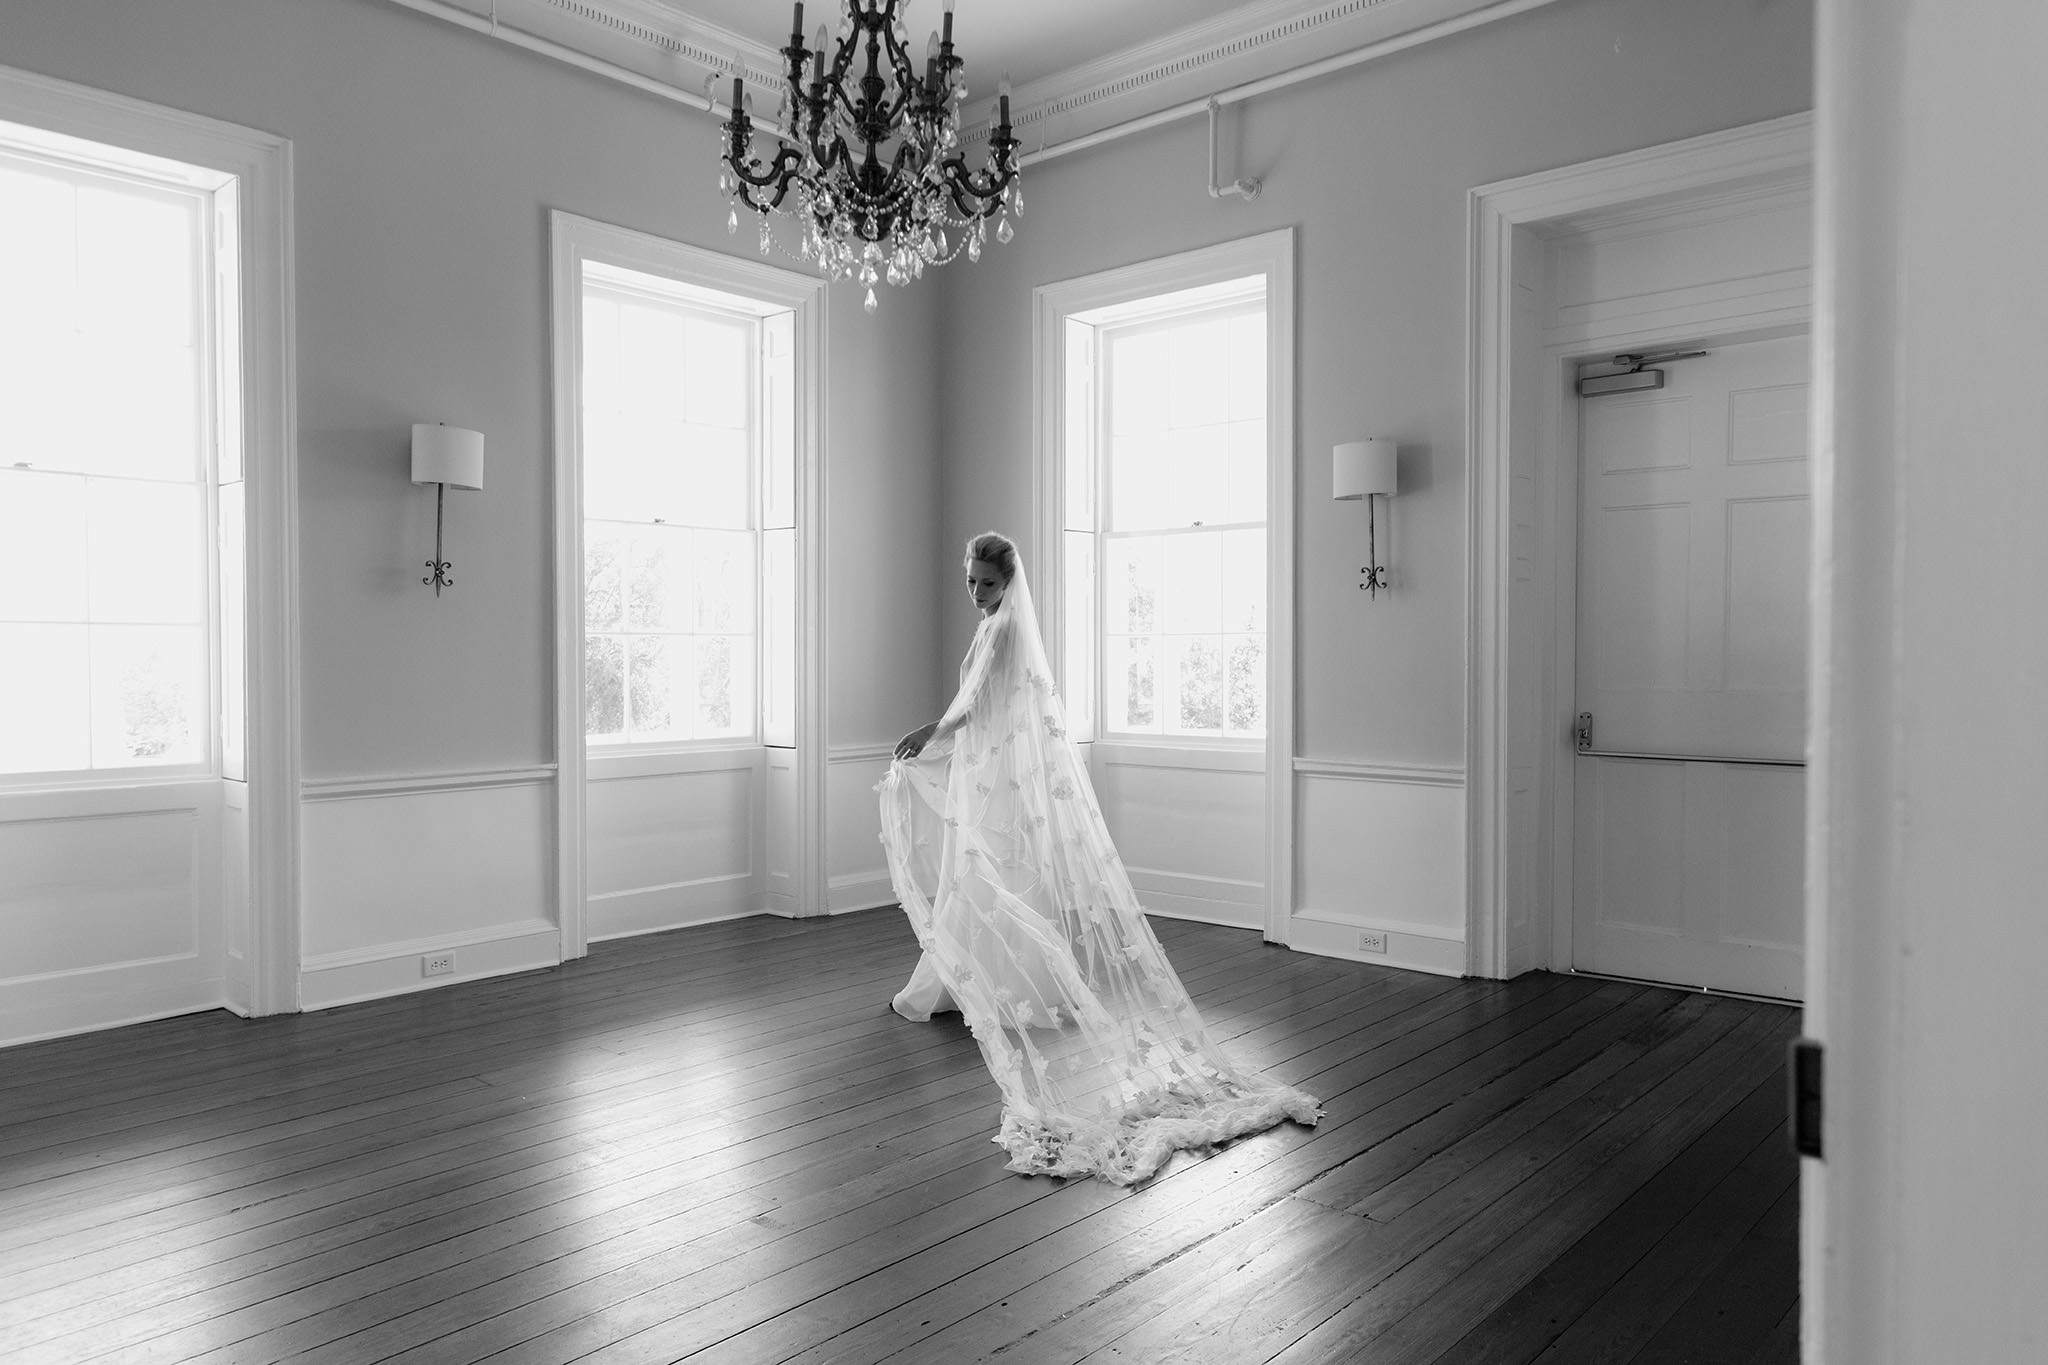 Woman fanning out long bridal veil in empty room with chandelier